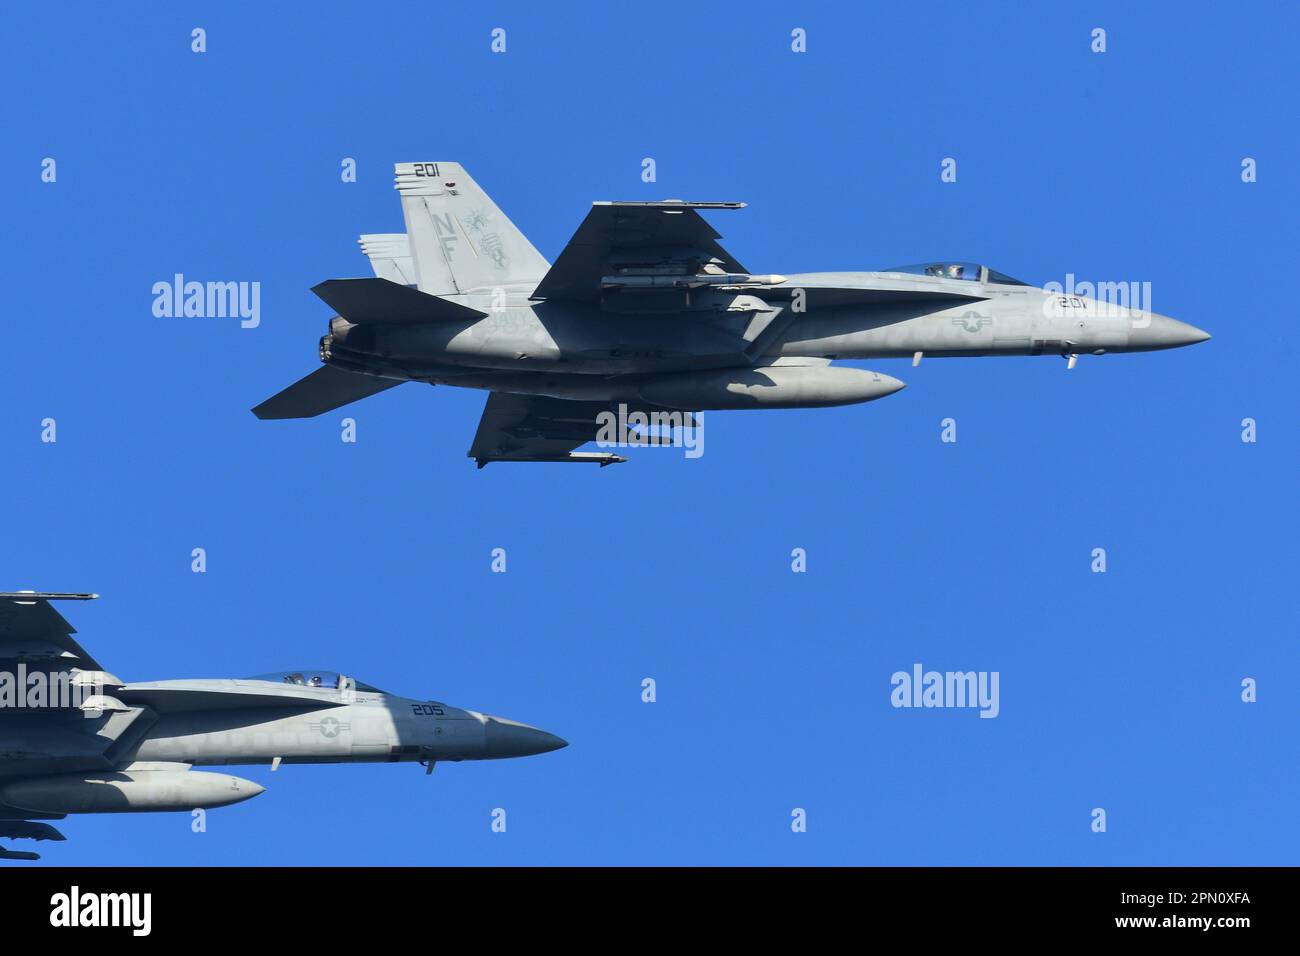 Kanagawa Prefecture, Japan - May 04, 2017: United States Navy Boeing F-18E Super Hornet multirole fighter aircraft from VFA-27 Royal Maces. Stock Photo